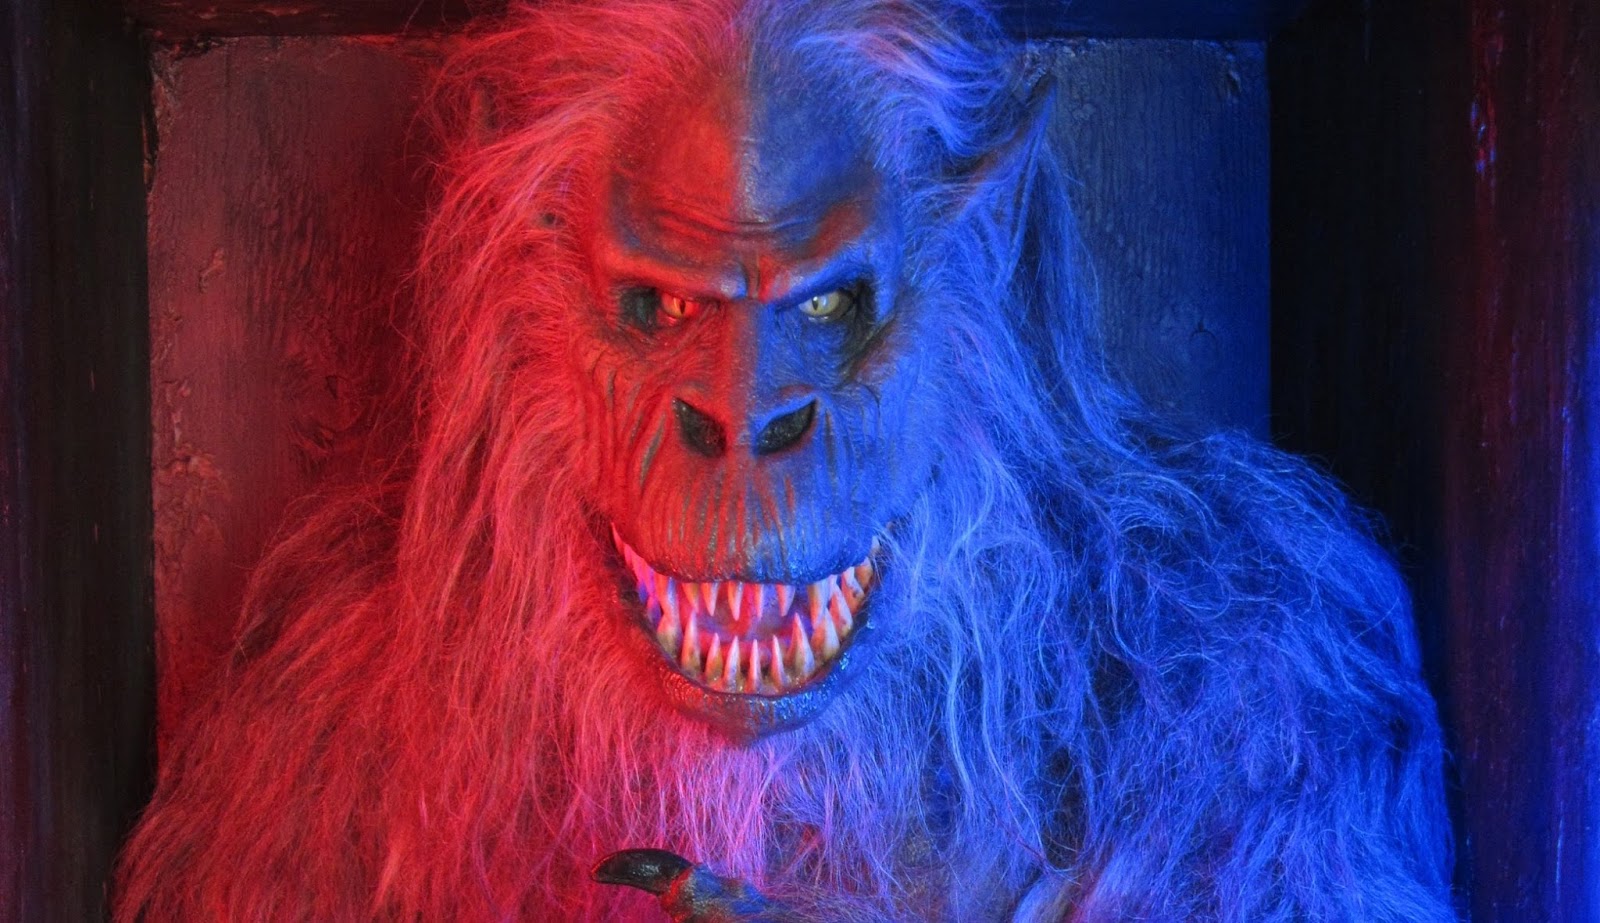 This is a still from Creepshow.